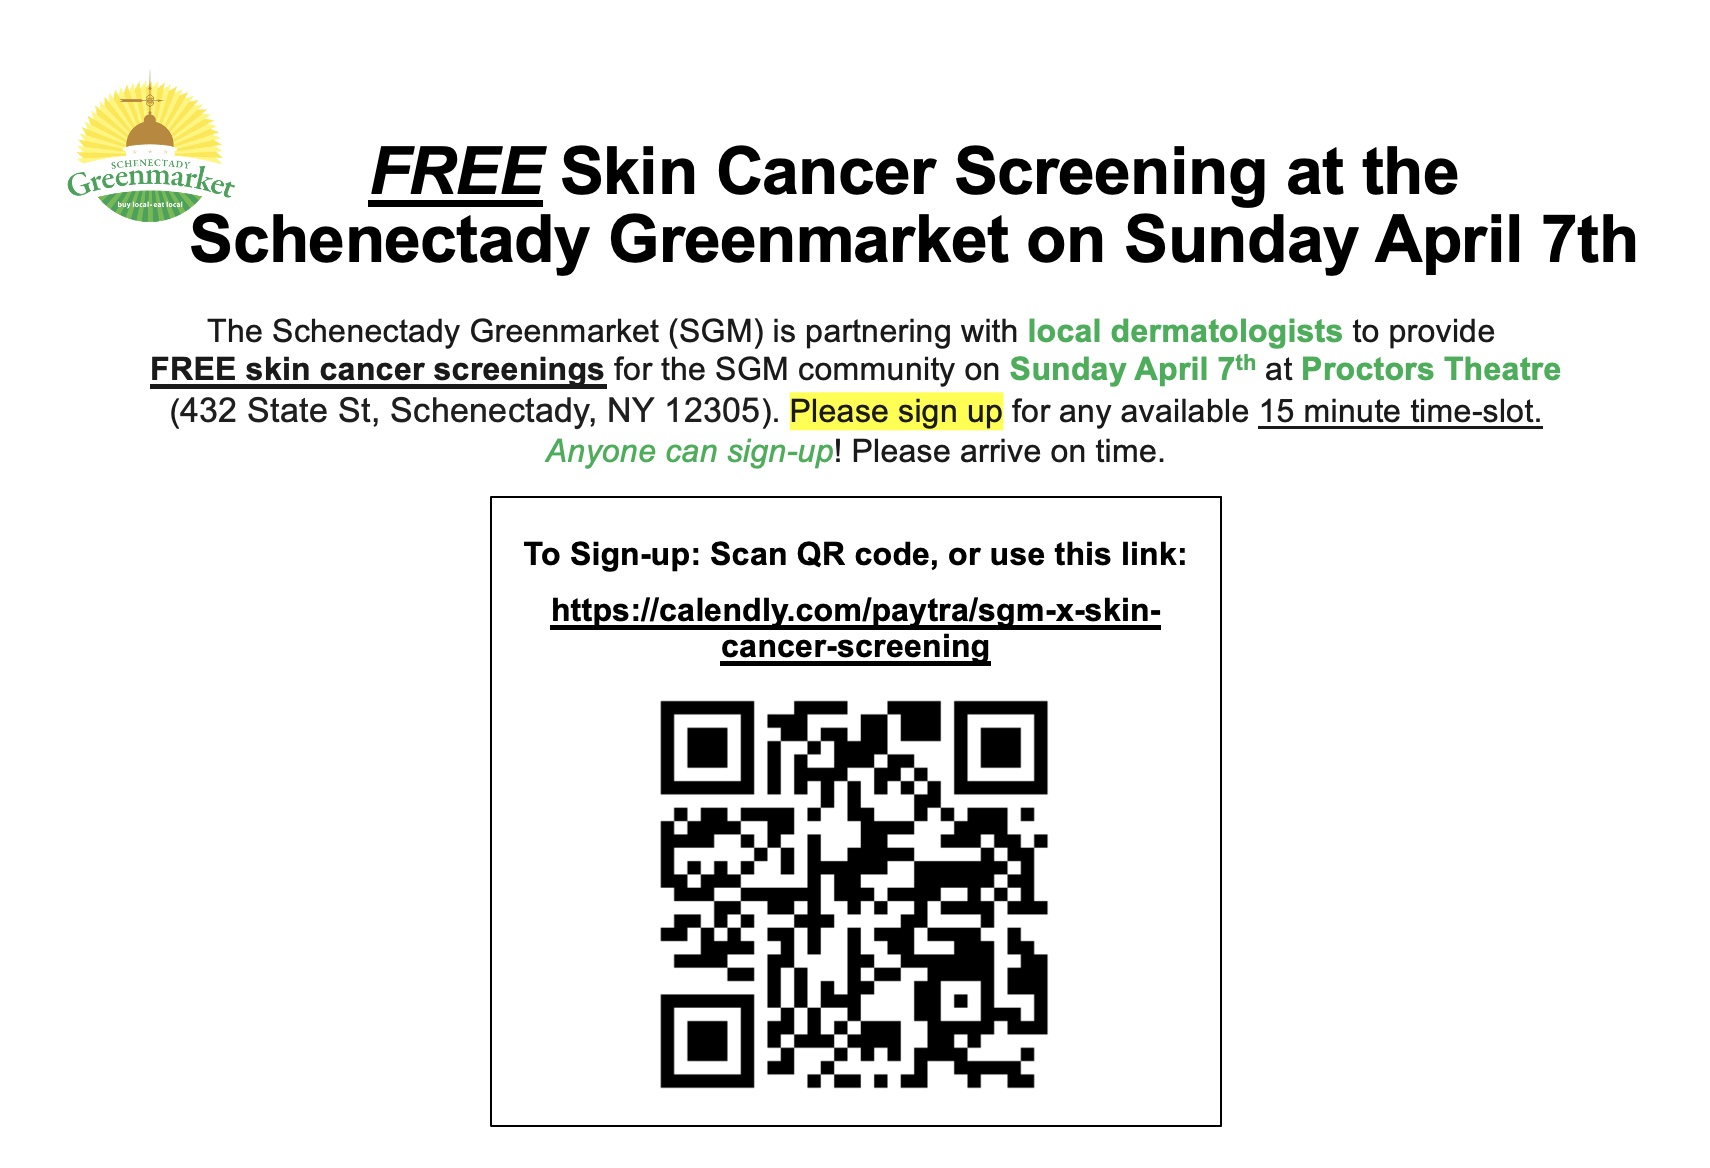 Flyer says Free Skin Cancer Screening at the Schenectady Greenmarket on Sunday April 17 The Schenectady Green Market (SGM) is partnering with local dermatologists to provide FREE skin cancer screenings for the SGM community on Sunday April 7th (8AM-12PM & 1-4PM) at Proctor's Theatre (in the Guild Room). Please sign up for any available 15 minute time-slot. Please arrive on time. To sign-up: Scan QR code, or use this link https://calendly.com/paytra/sgm-x-skin-cancer-screening?month=2024-04